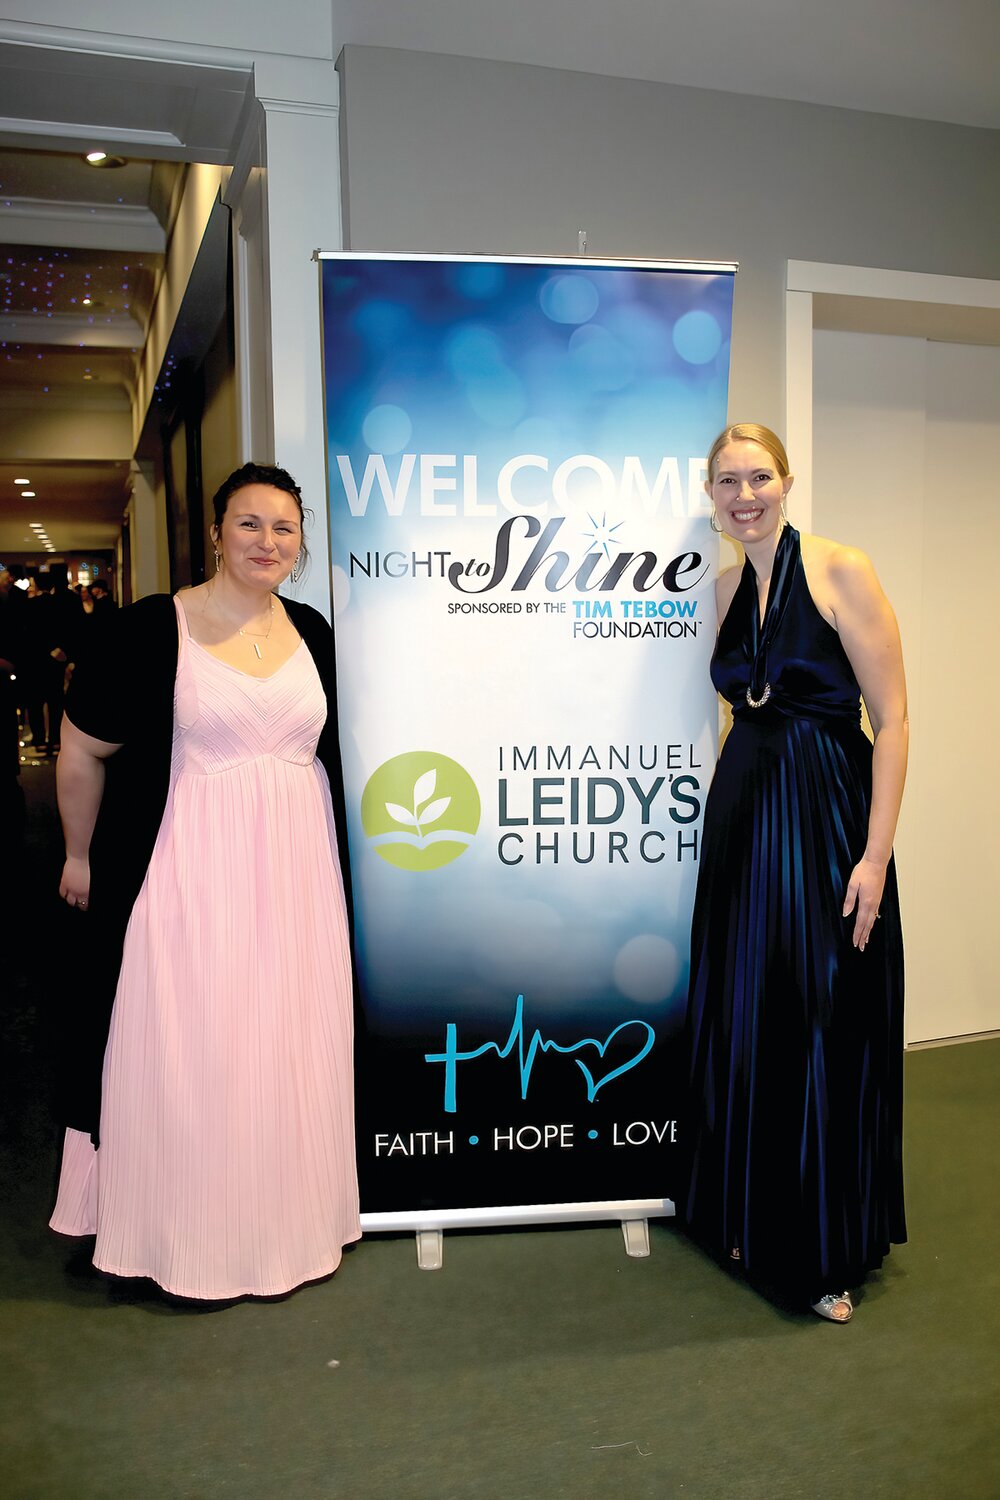 Sara Shoaf and Melissa Moyer, co-coordinators of Night to Shine at Immanuel Leidy’s Church.